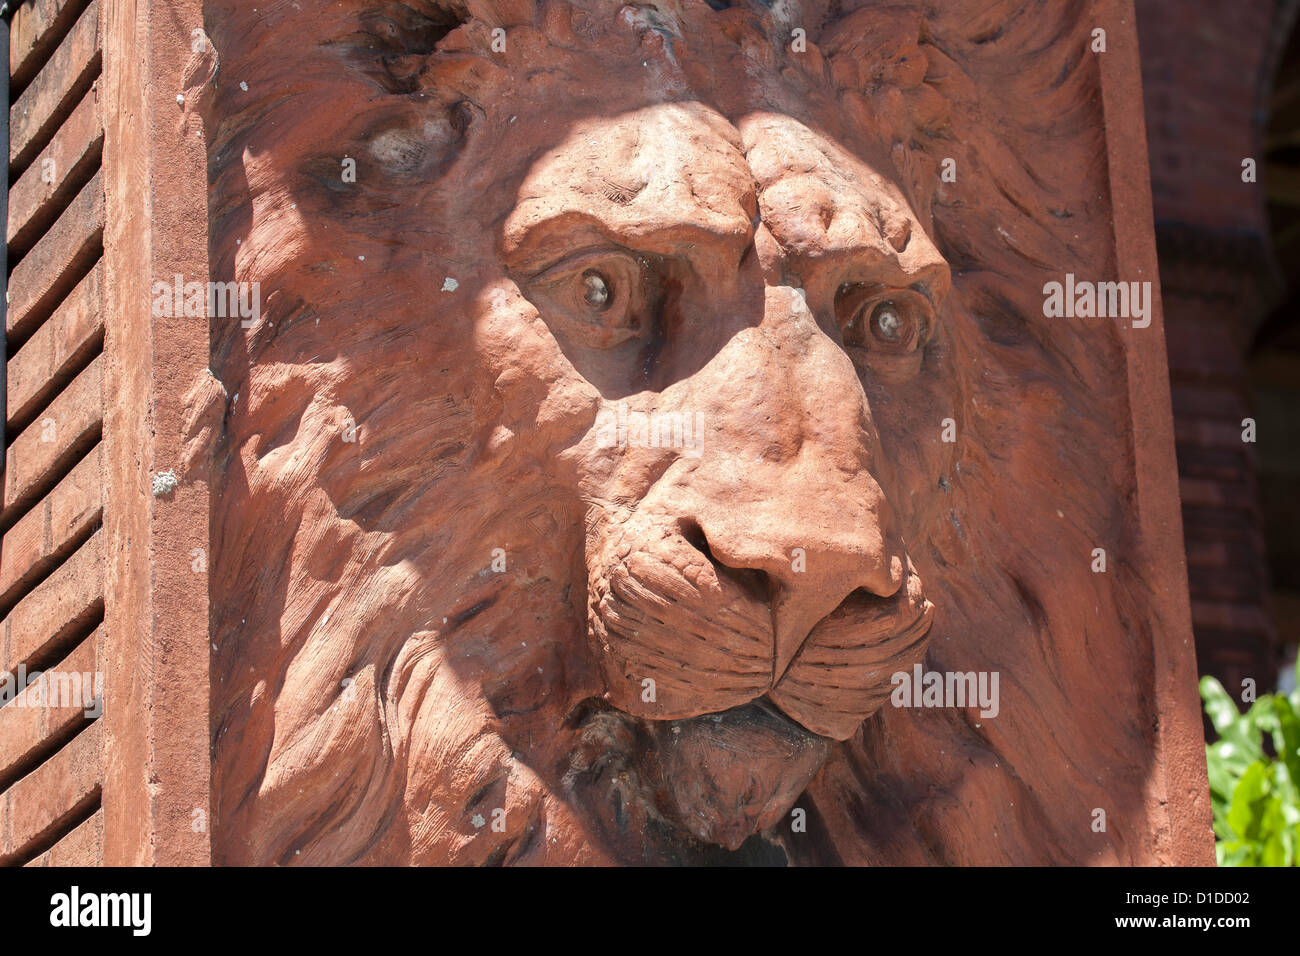 Stone sculpture of lion's face and mane in column at Flagler College in St. Augustine, Florida, USA Stock Photo